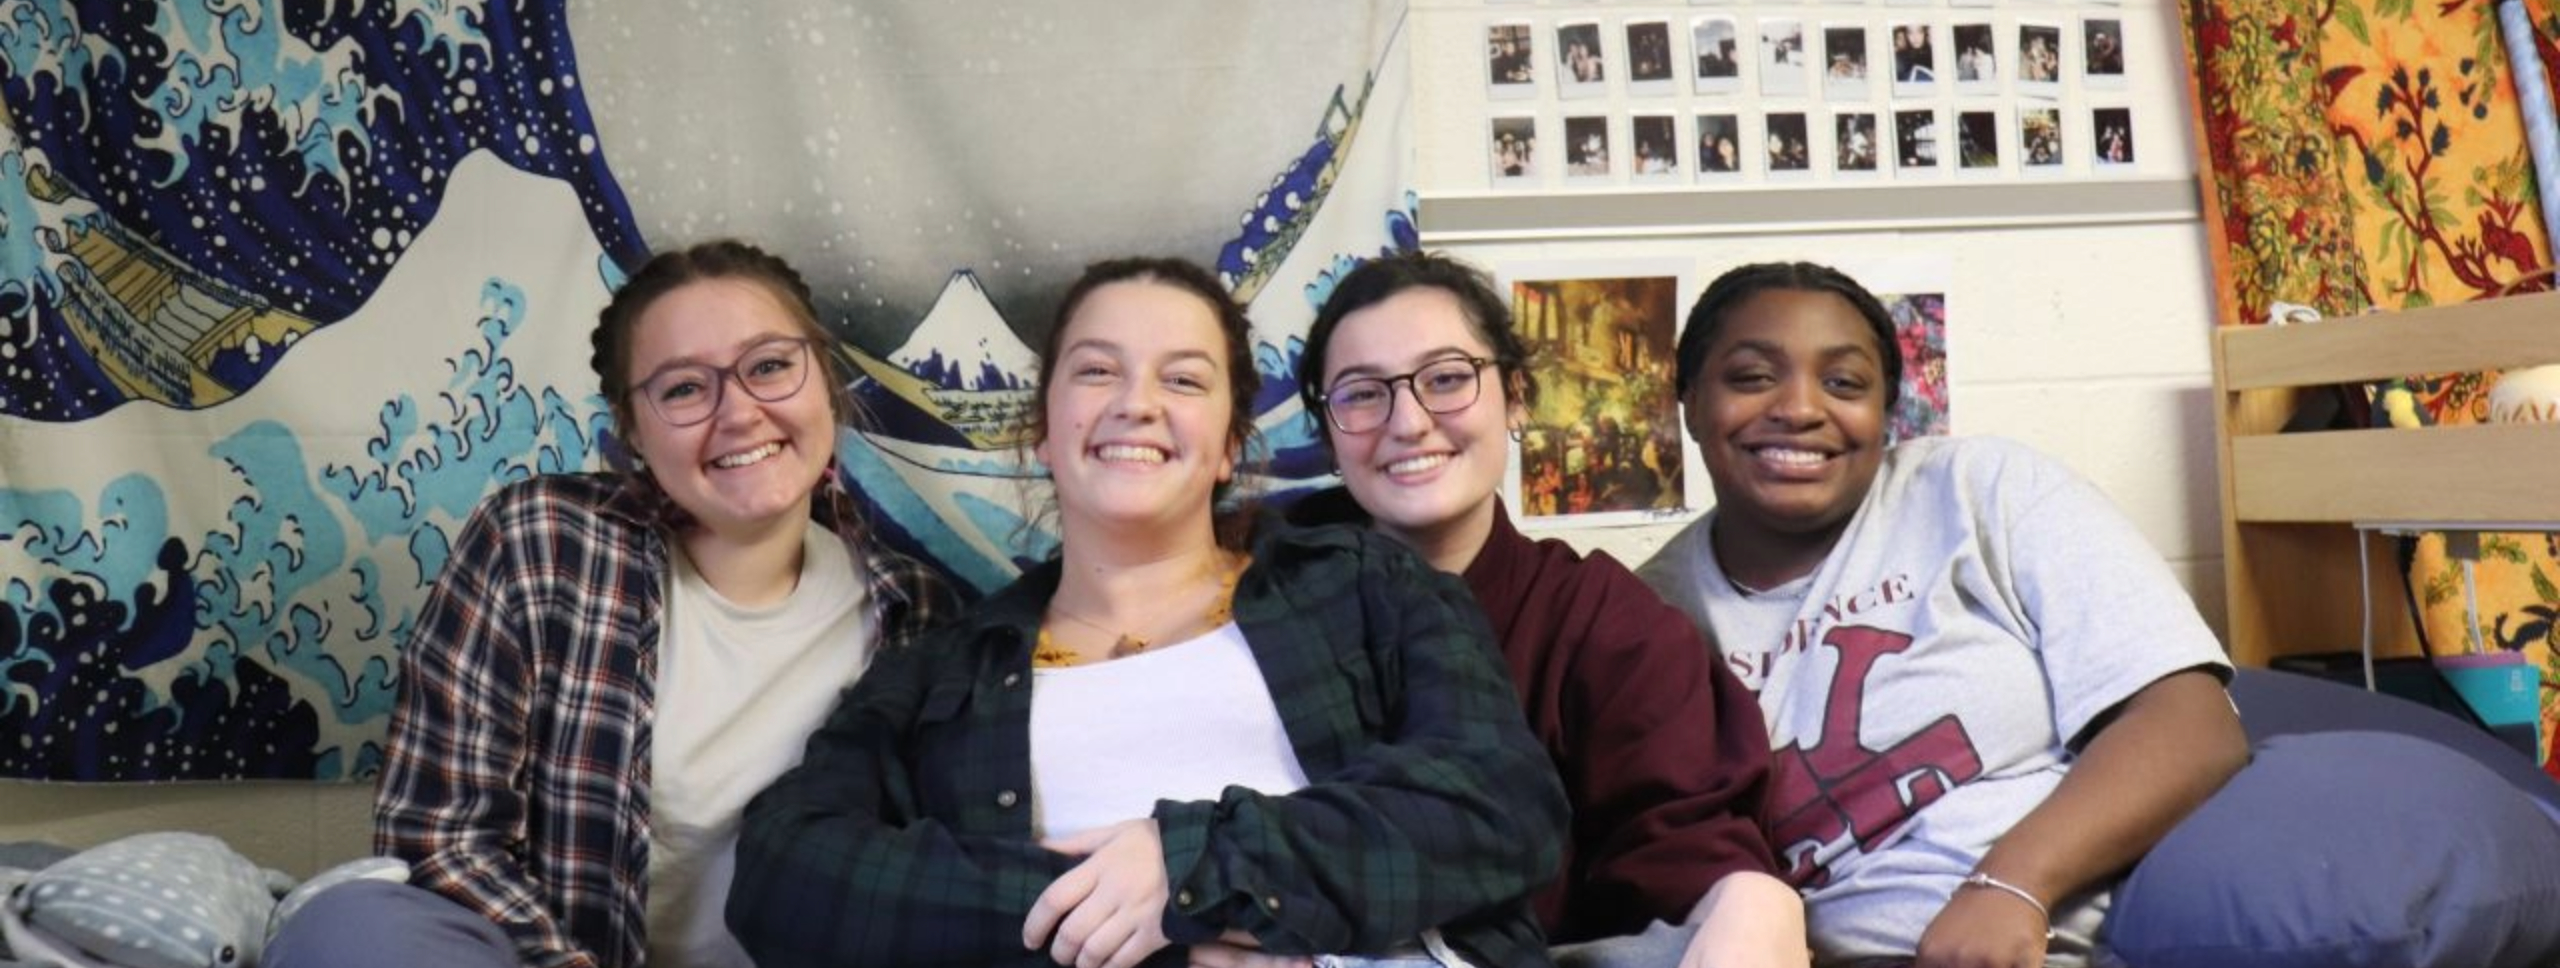 four students sitting on a residence hall room bed smiling